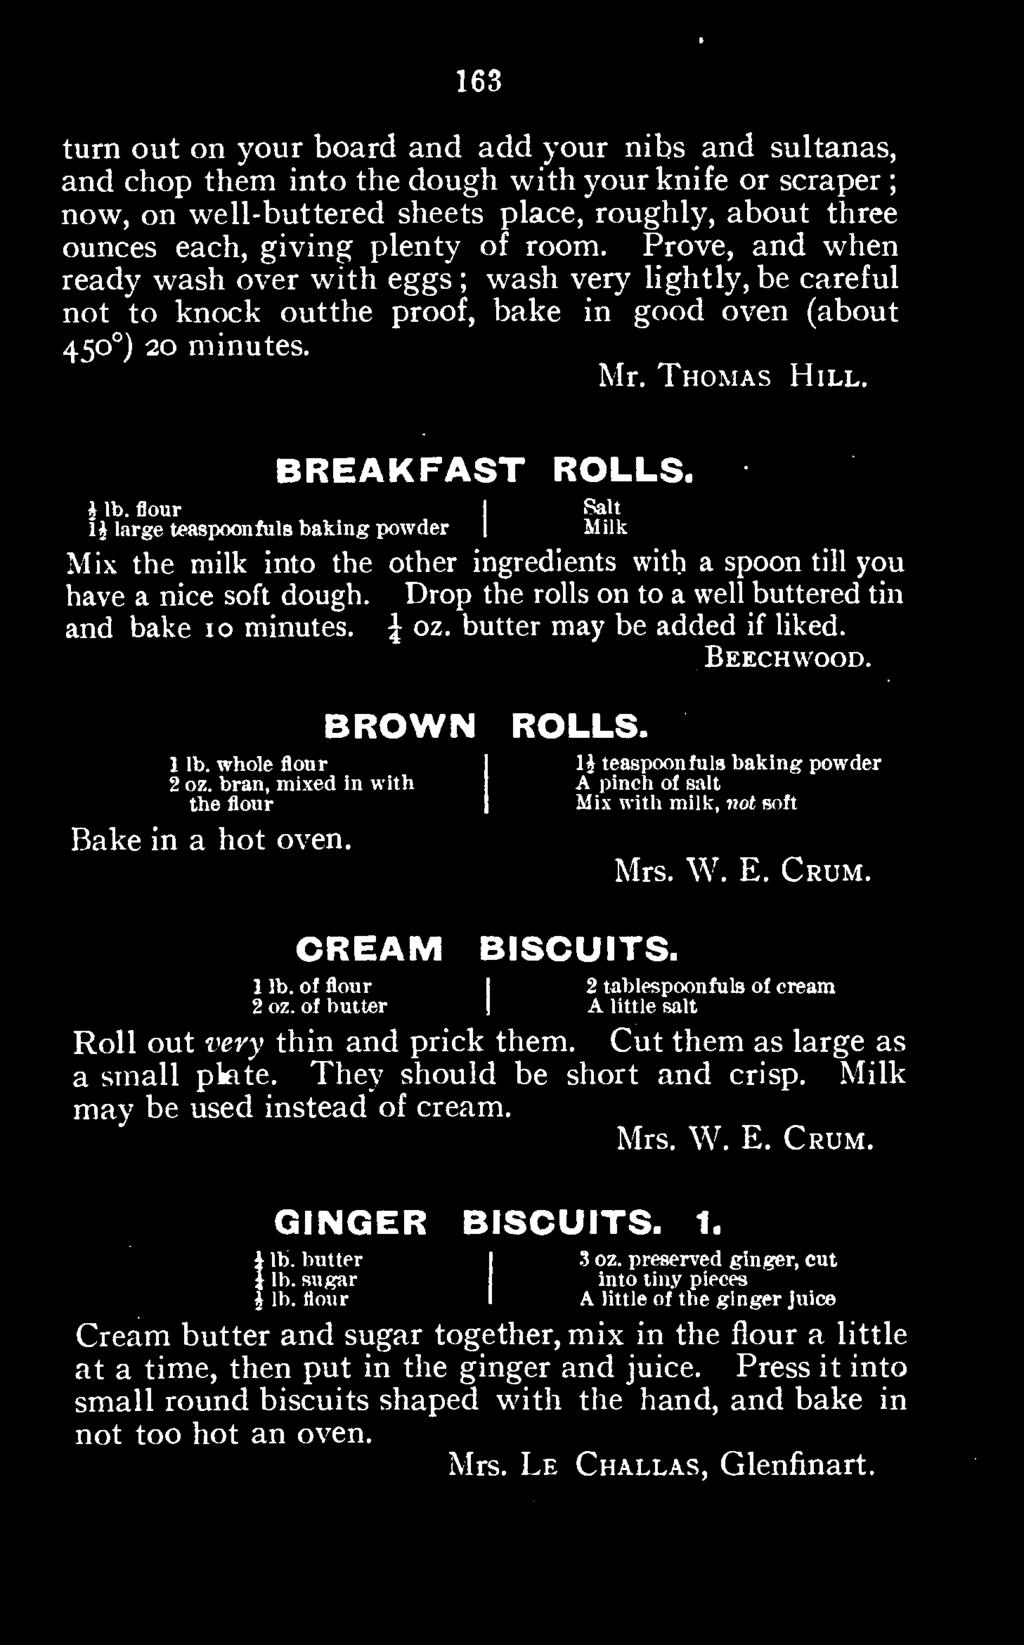 whole bran, mixed flour in with 1 A li pinch teaspoonfuls of salt baking powder the flour I Mix with milk, not soft Bake in a hot oven. Mrs. W. E. Crum. CREAM BISCUITS. 21 oz. lb.